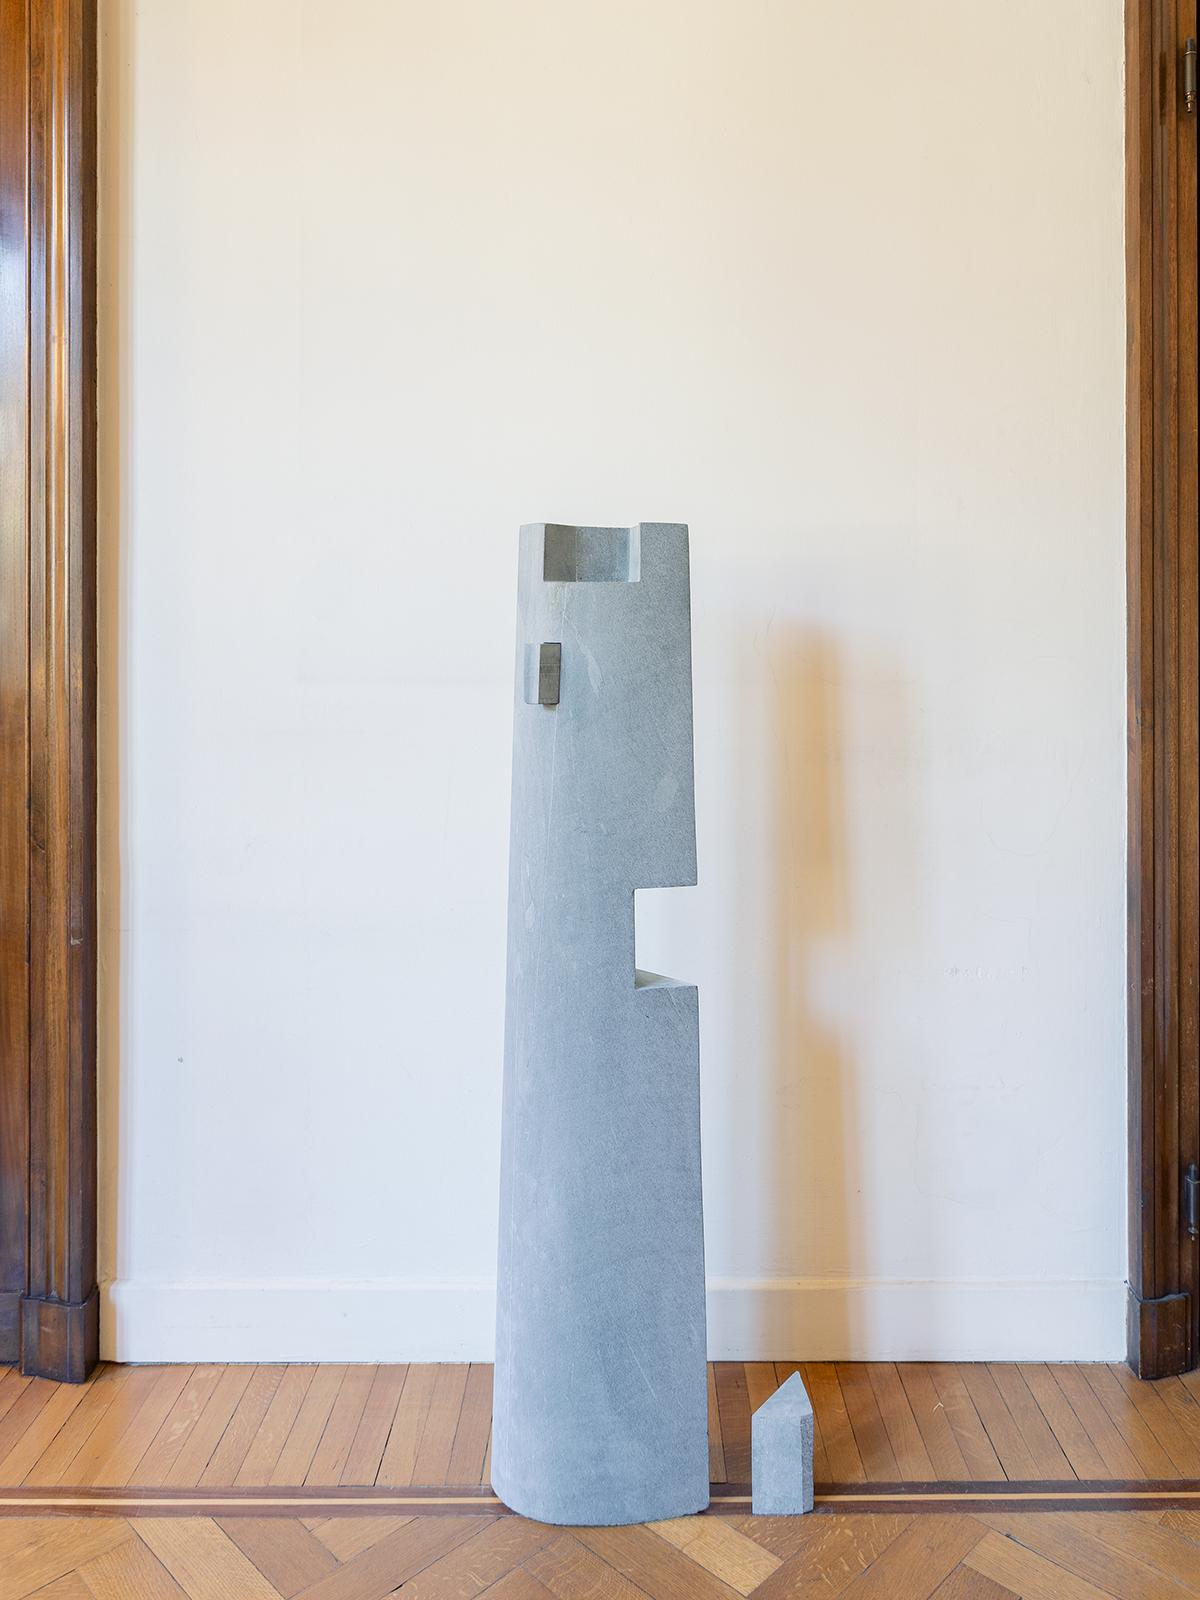 1617G Totem sculpture by Scattered Disc Objects
Limited Edition.
Dimensions: D 28 x W 21 x H 135 cm.
Materials: Flat honed marble surfaces.
Handmade in Italy.
For possible future orders the item can be customized in other marble stones based on